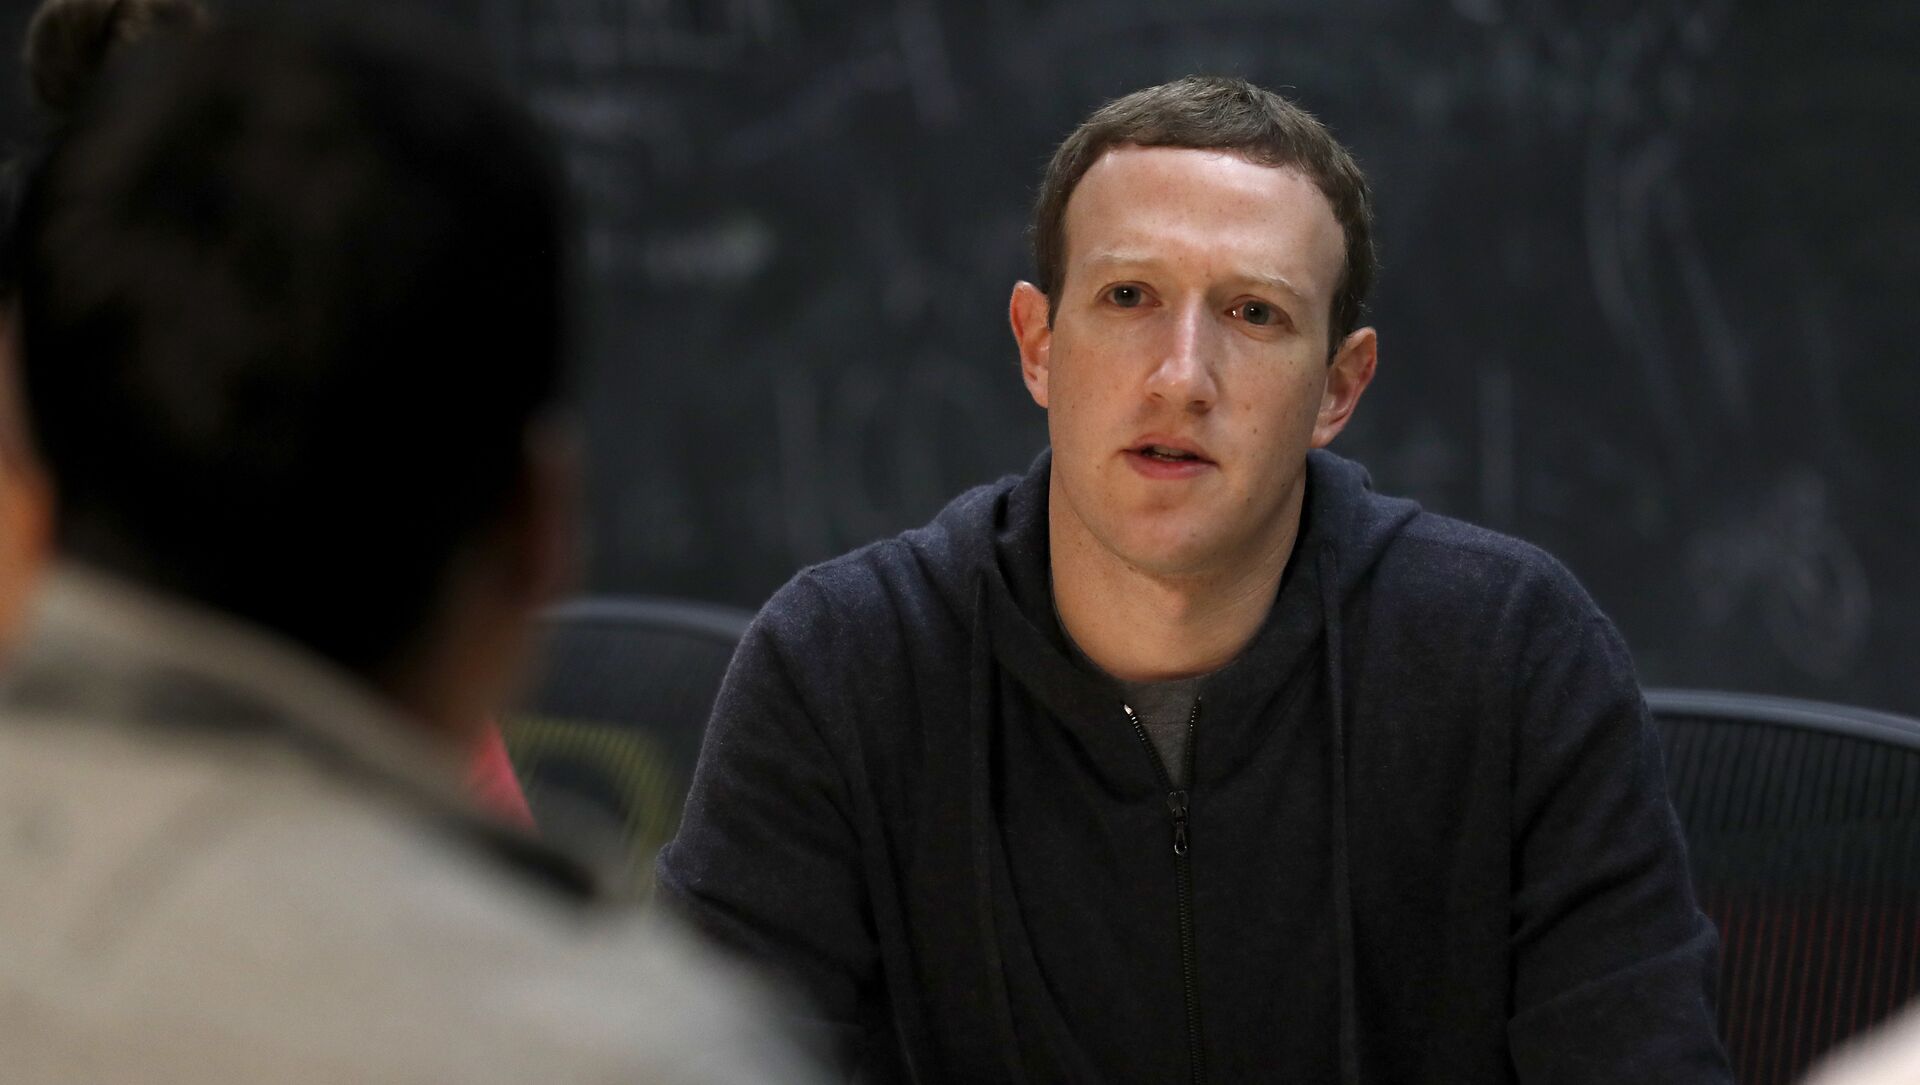 Facebook CEO Mark Zuckerberg meets with a group of entrepreneurs and innovators during a round-table discussion at Cortex Innovation Community technology hub Thursday, Nov. 9, 2017, in St. Louis - Sputnik International, 1920, 19.02.2021